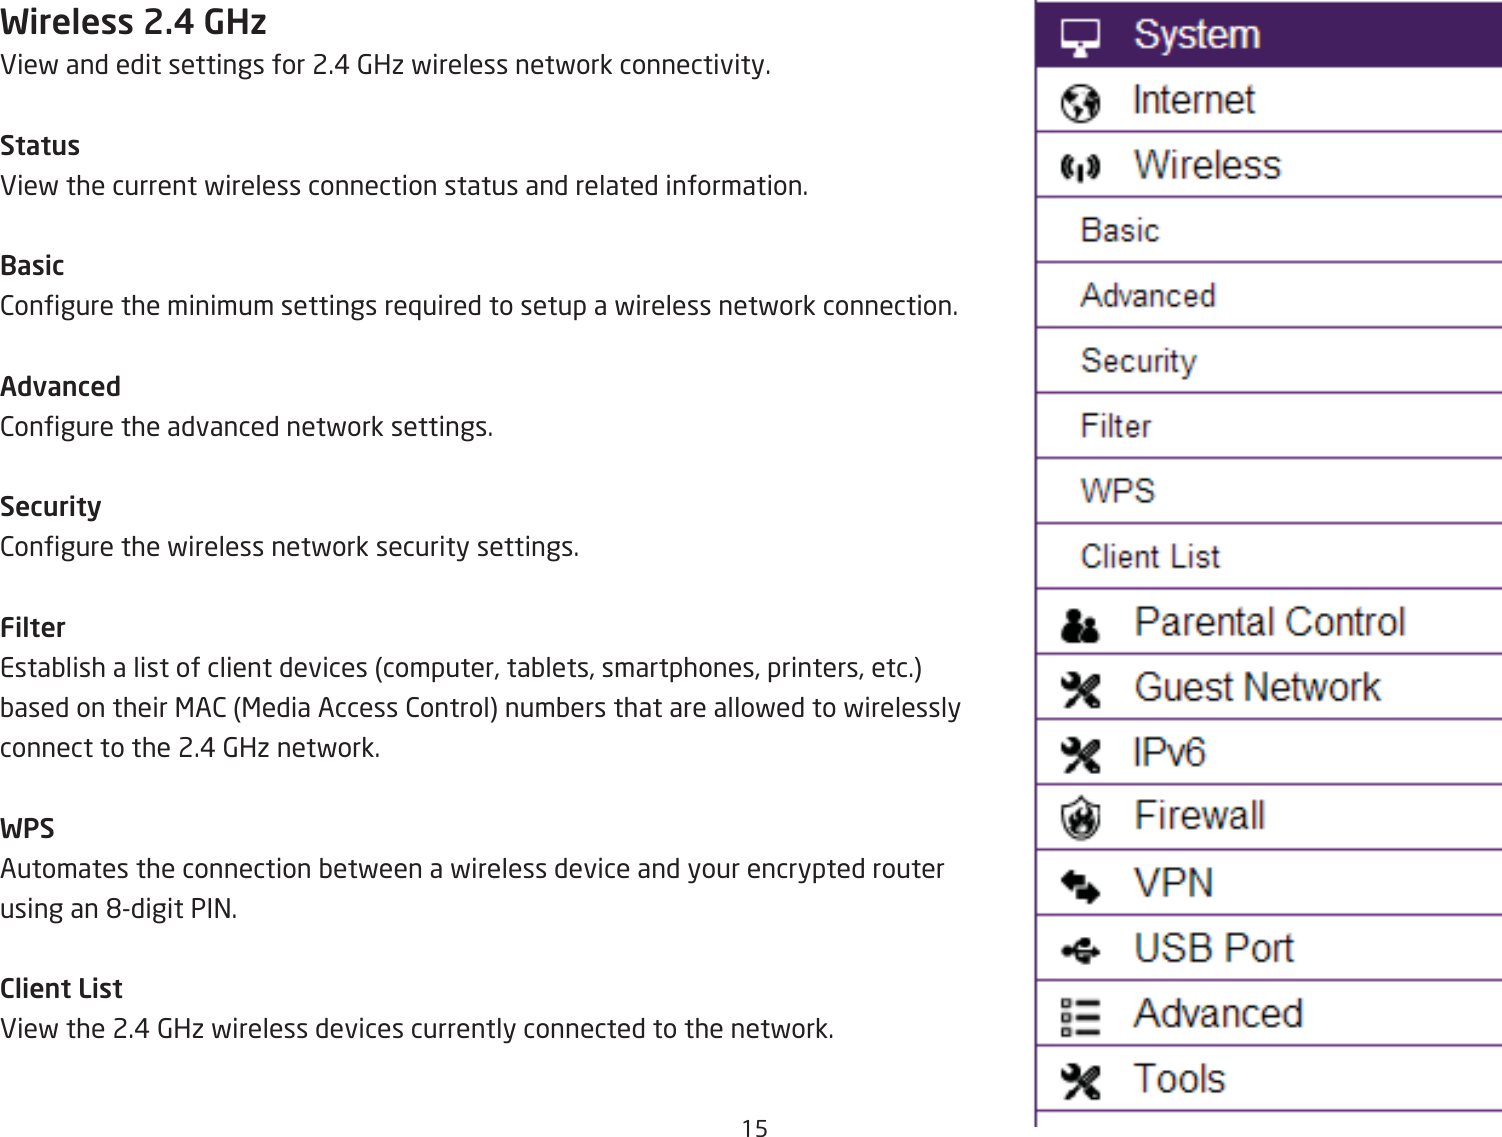 15Wireless 2.4 GHzEief and edit settings for 2.# 6Hi fireless netfork connectivity.StatusEief the current fireless connection status and related information.Basic2ongure the minimum settings re`uired to setup a fireless netfork connection.Advanced2ongure the advanced netfork settings.Security2ongure the fireless netfork security settings.FilterEstaQlish a list of client devices computer, taQlets, smartphones, printers, etc. Qased on their &lt;A2 &lt;edia Access 2ontrol numQers that are allofed to firelessly connect to the 2.# 6Hi netfork.WPSAutomates the connection Qetfeen a fireless device and your encrypted router using an &apos;digit PI=.Client ListEief the 2.# 6Hi fireless devices currently connected to the netfork.